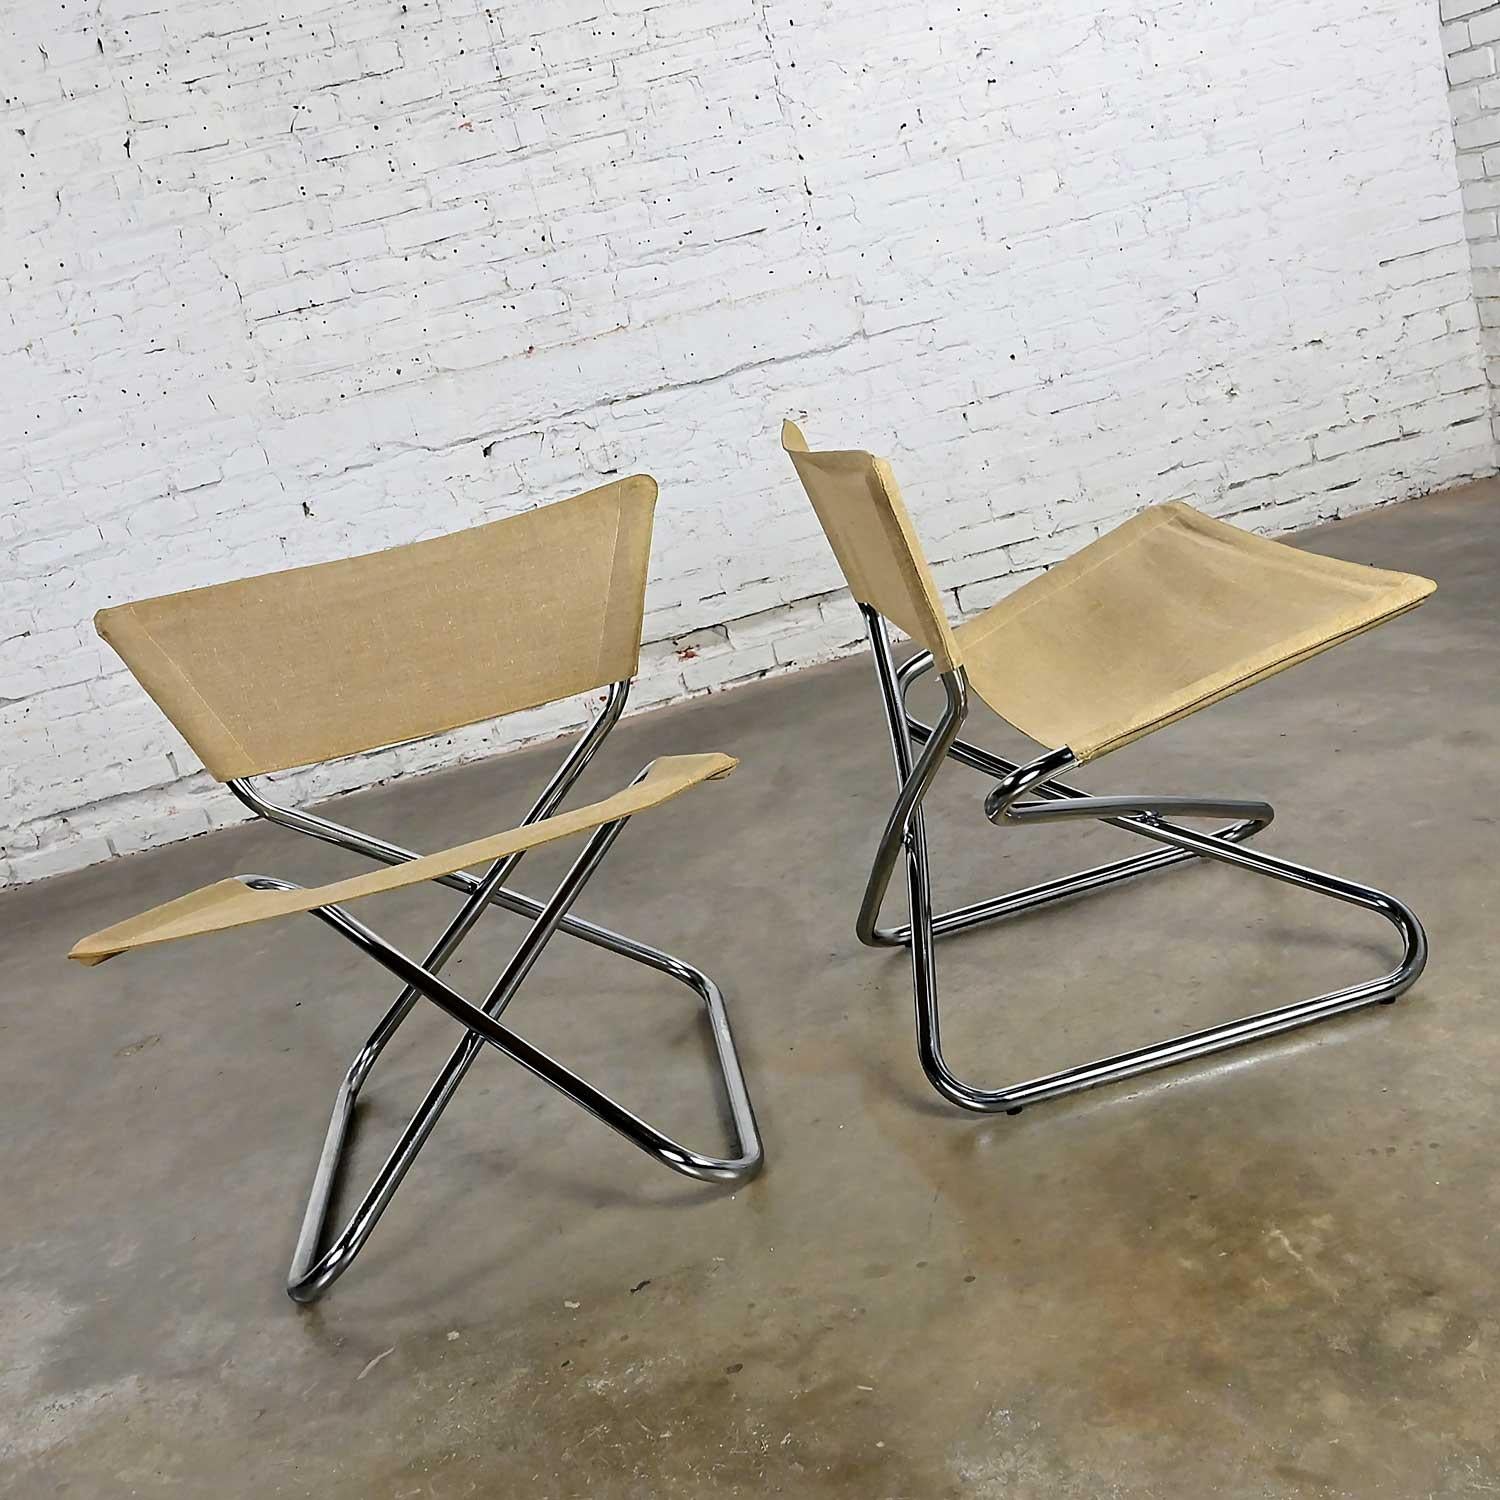 Impressive vintage Scandinavian Modern Erik Magnussen Z Down folding chairs by Torben Orzkov in Denmark, a pair. Comprised of chrome tube frames and natural canvas. Beautiful condition, keeping in mind that these are vintage and not new so will have